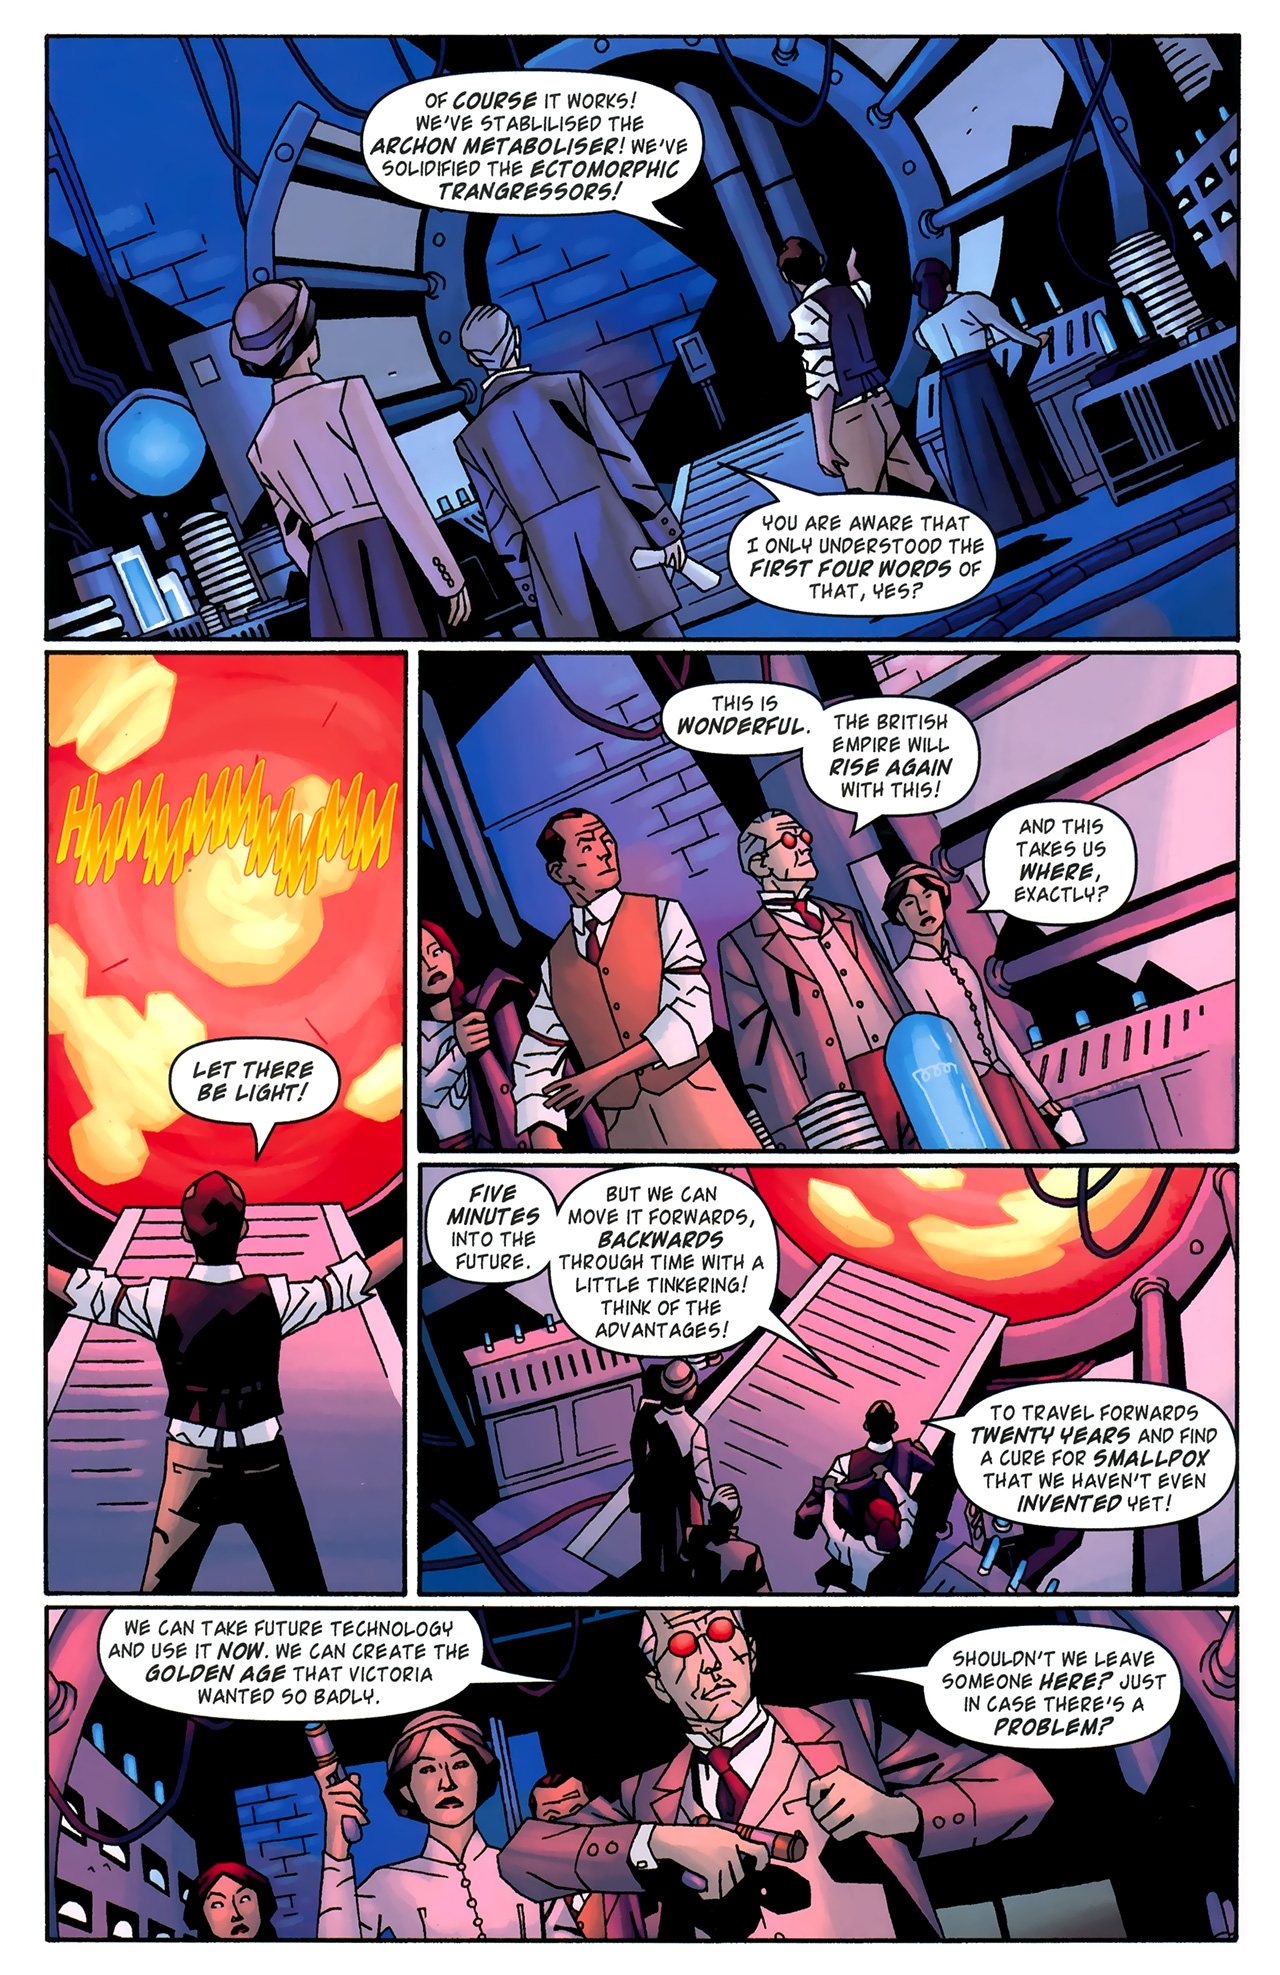 Doctor Who (2009) issue 13 - Page 4